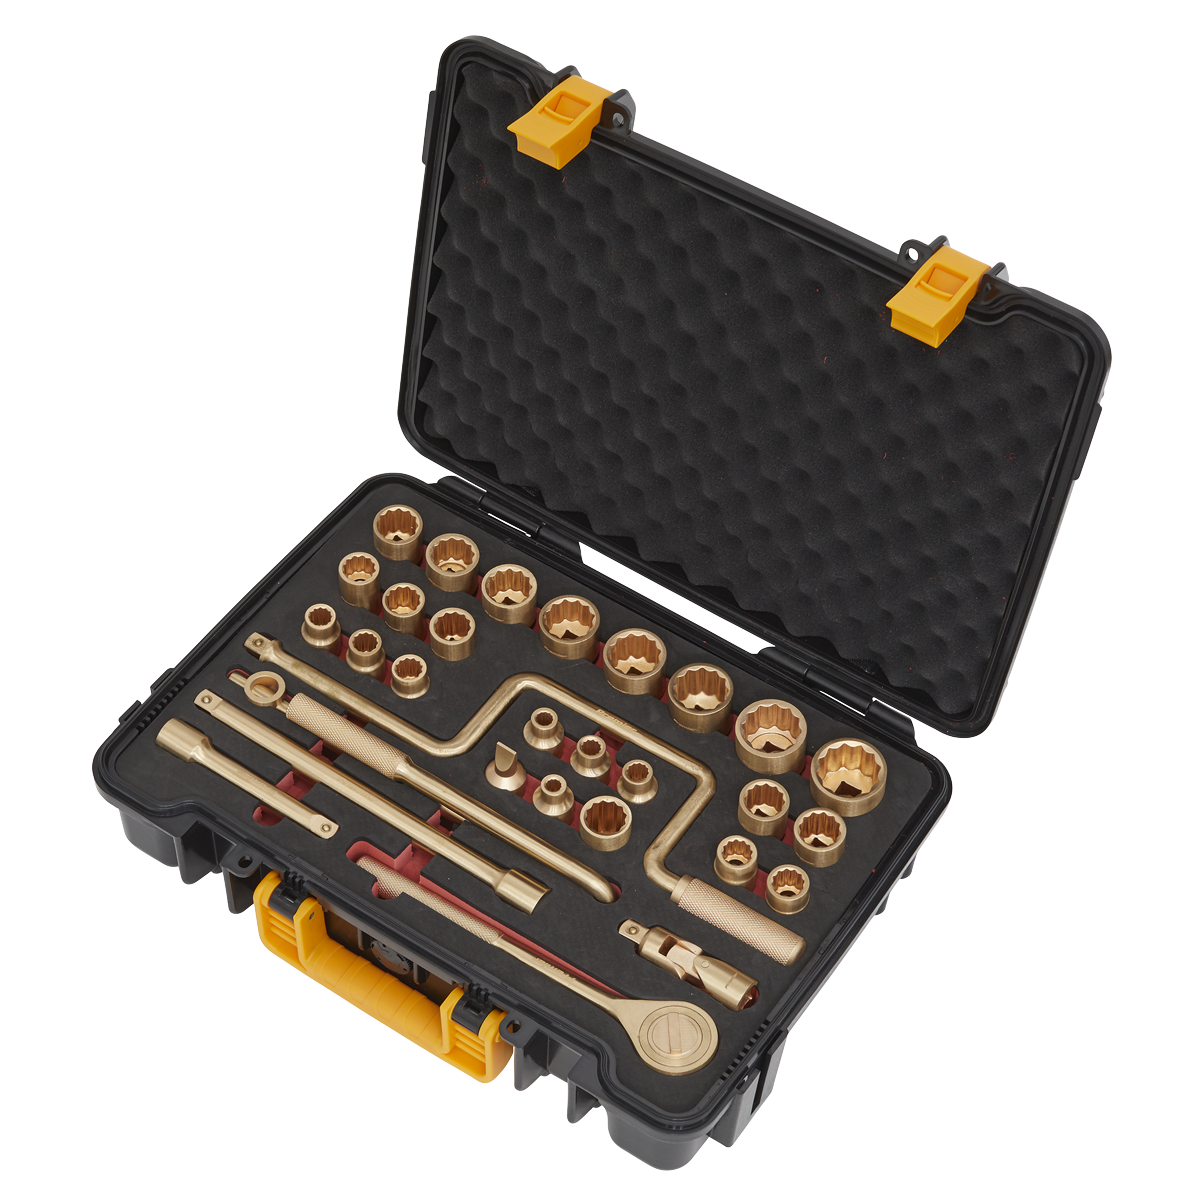 Sealey professional Premier Non-Sparking Safety Tools socketry set